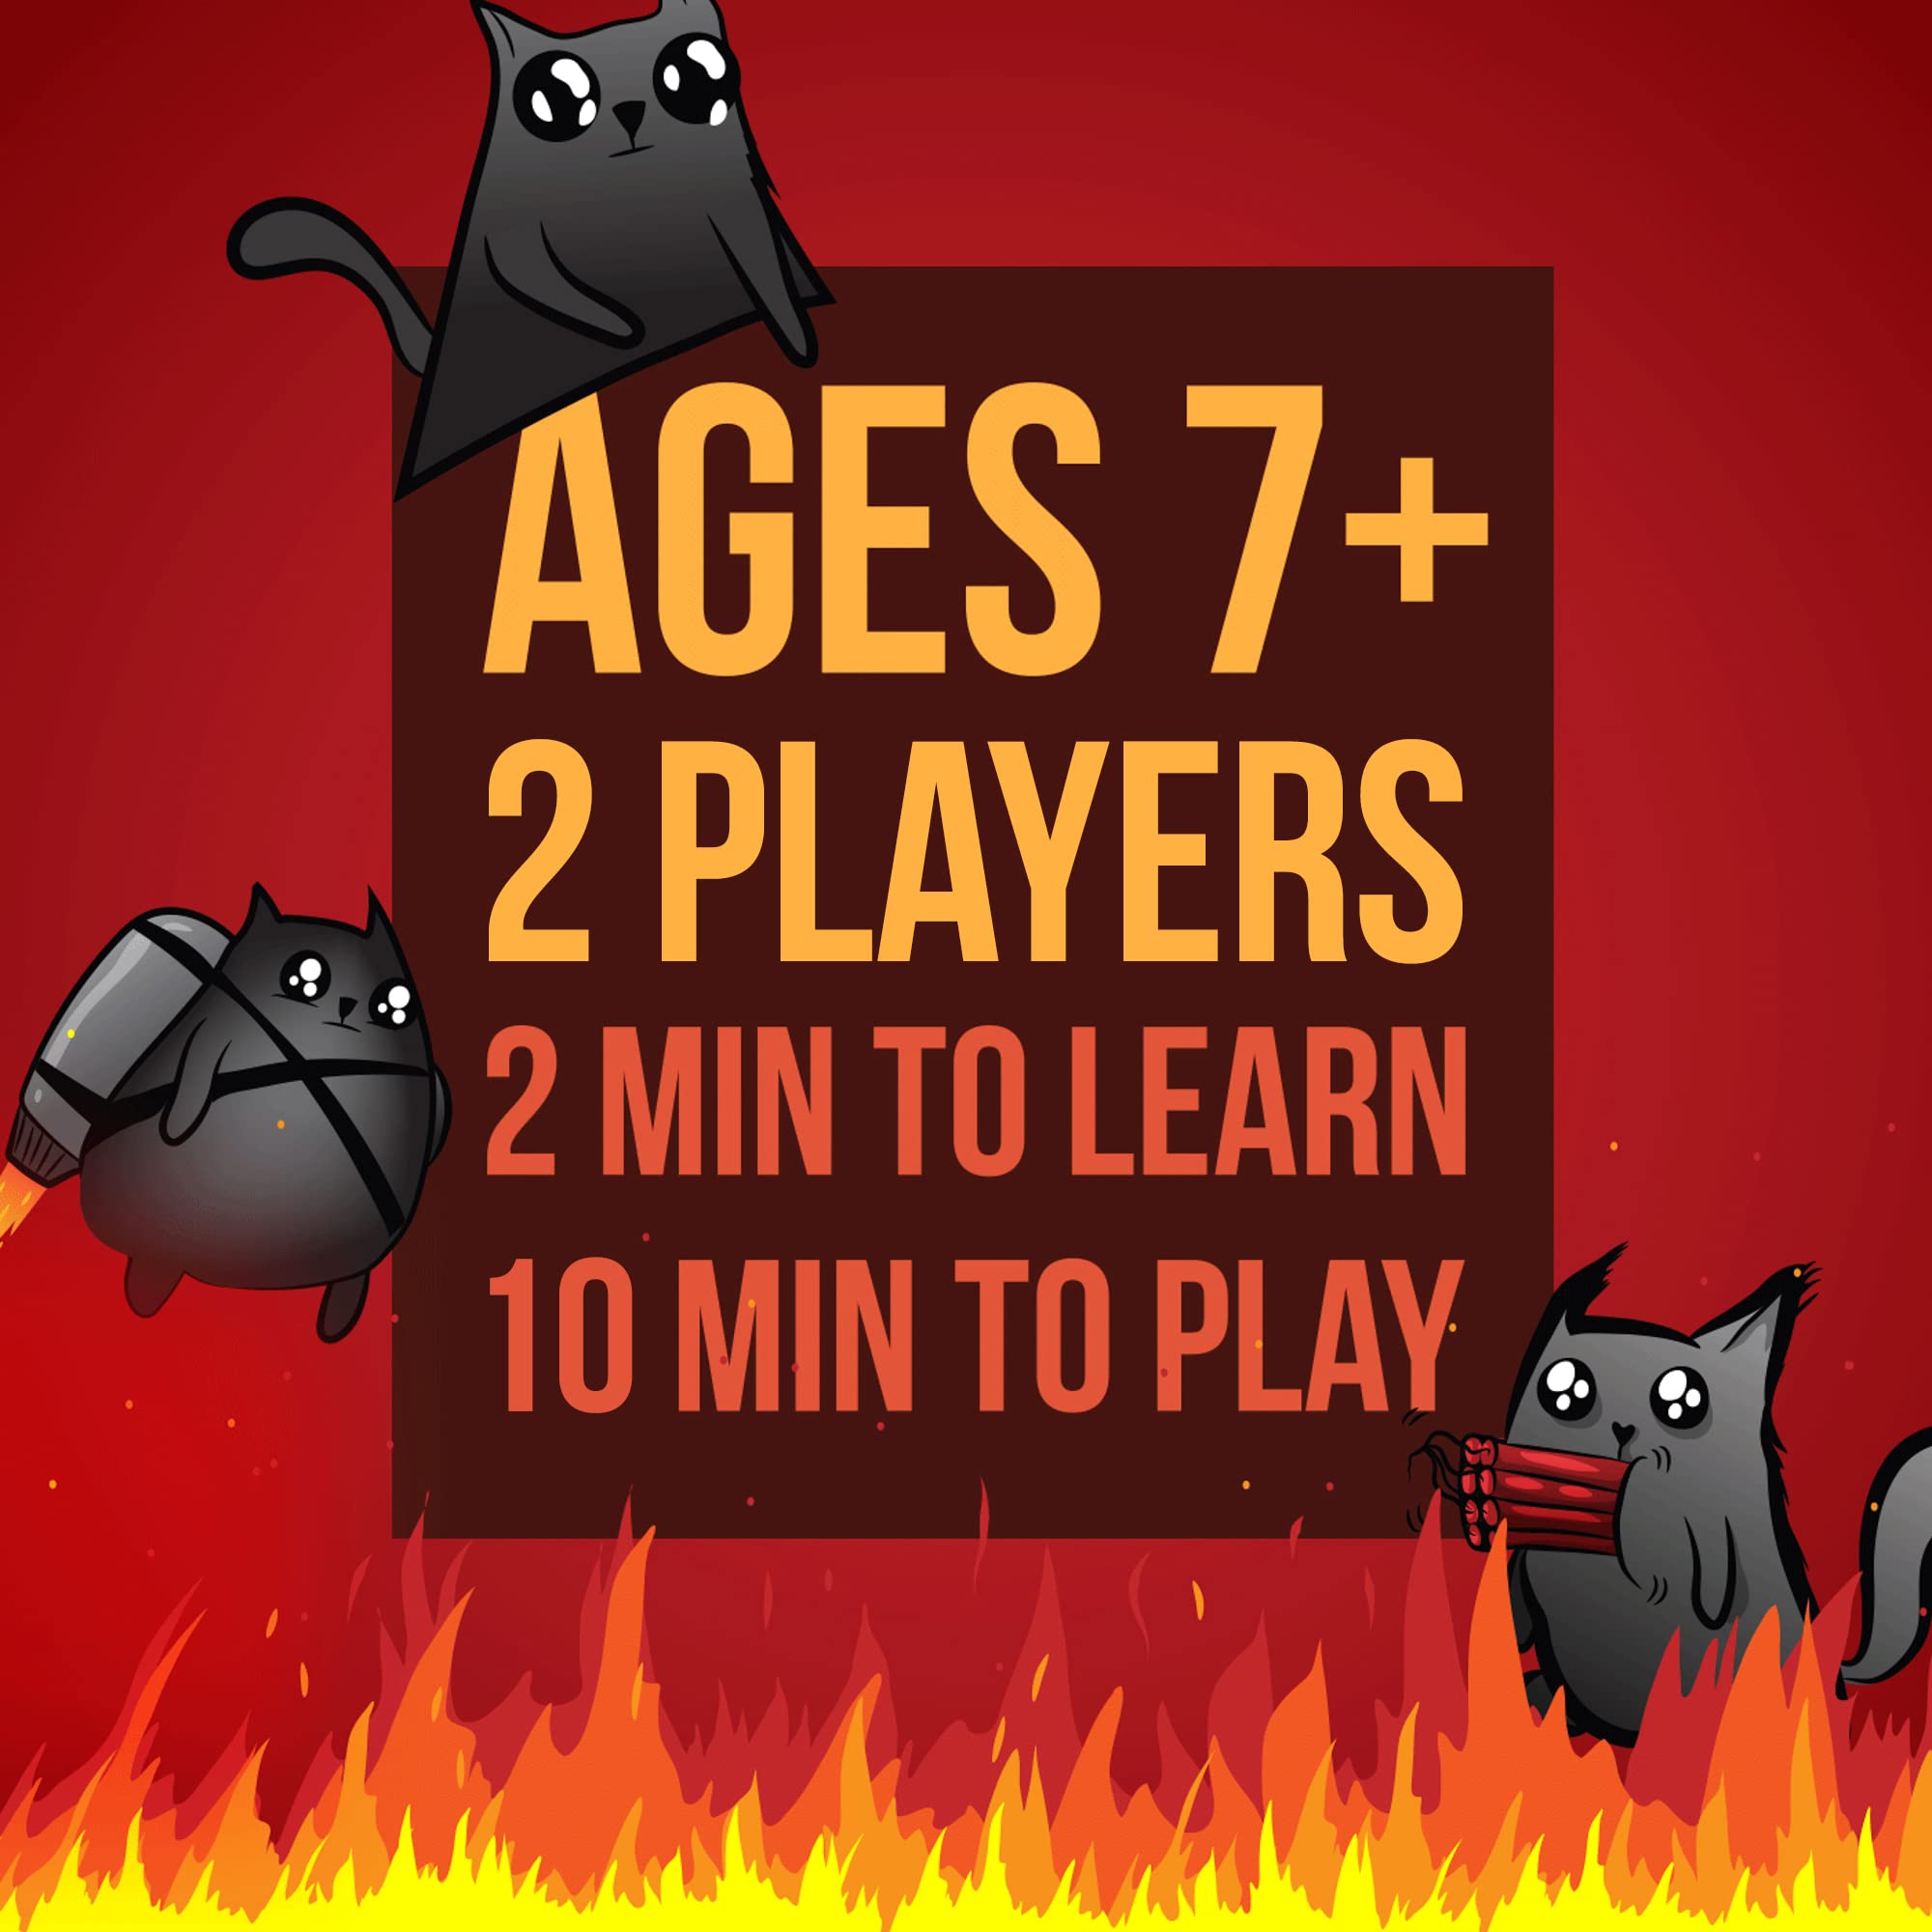 Exploding Kittens Original 2 Player Edition - Hilarious Games for Family Game Night - Funny Card Games for Ages 7 and Up - 56 Cards